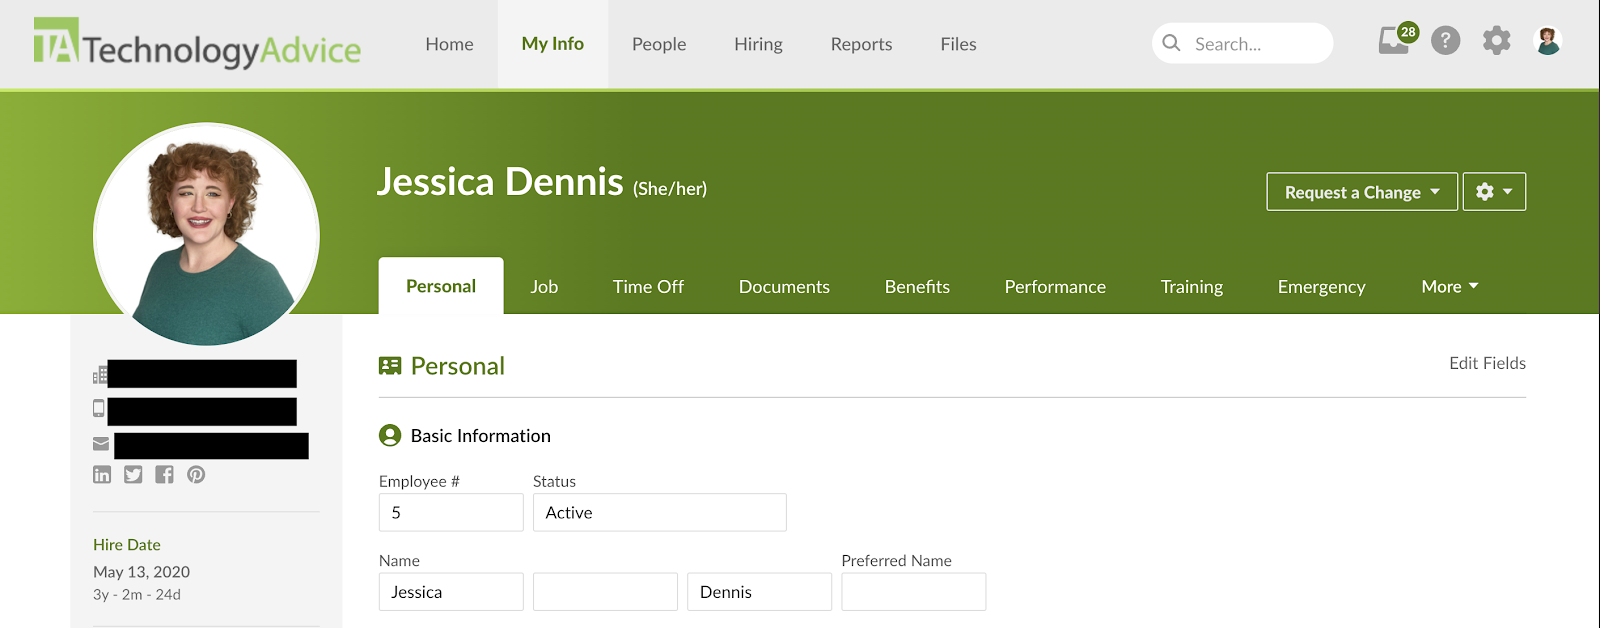 BambooHR displays an employee profile for Jessica Dennis with horizontal tabs to access personal, job, time off, documents, benefits, performance, training, and emergency information.